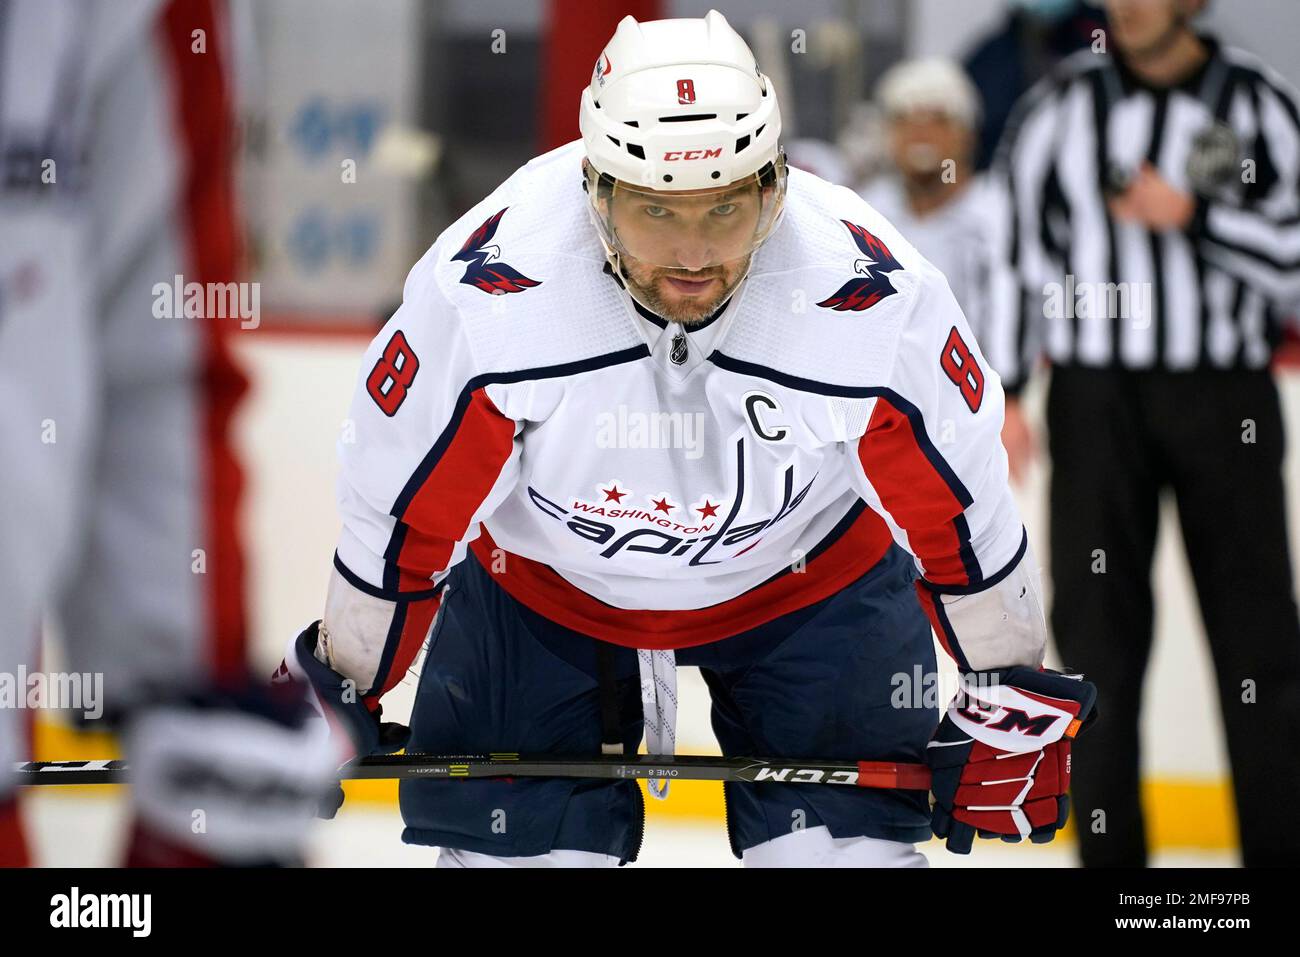 The City of Pittsburgh denounced this photoshop of Alex Ovechkin